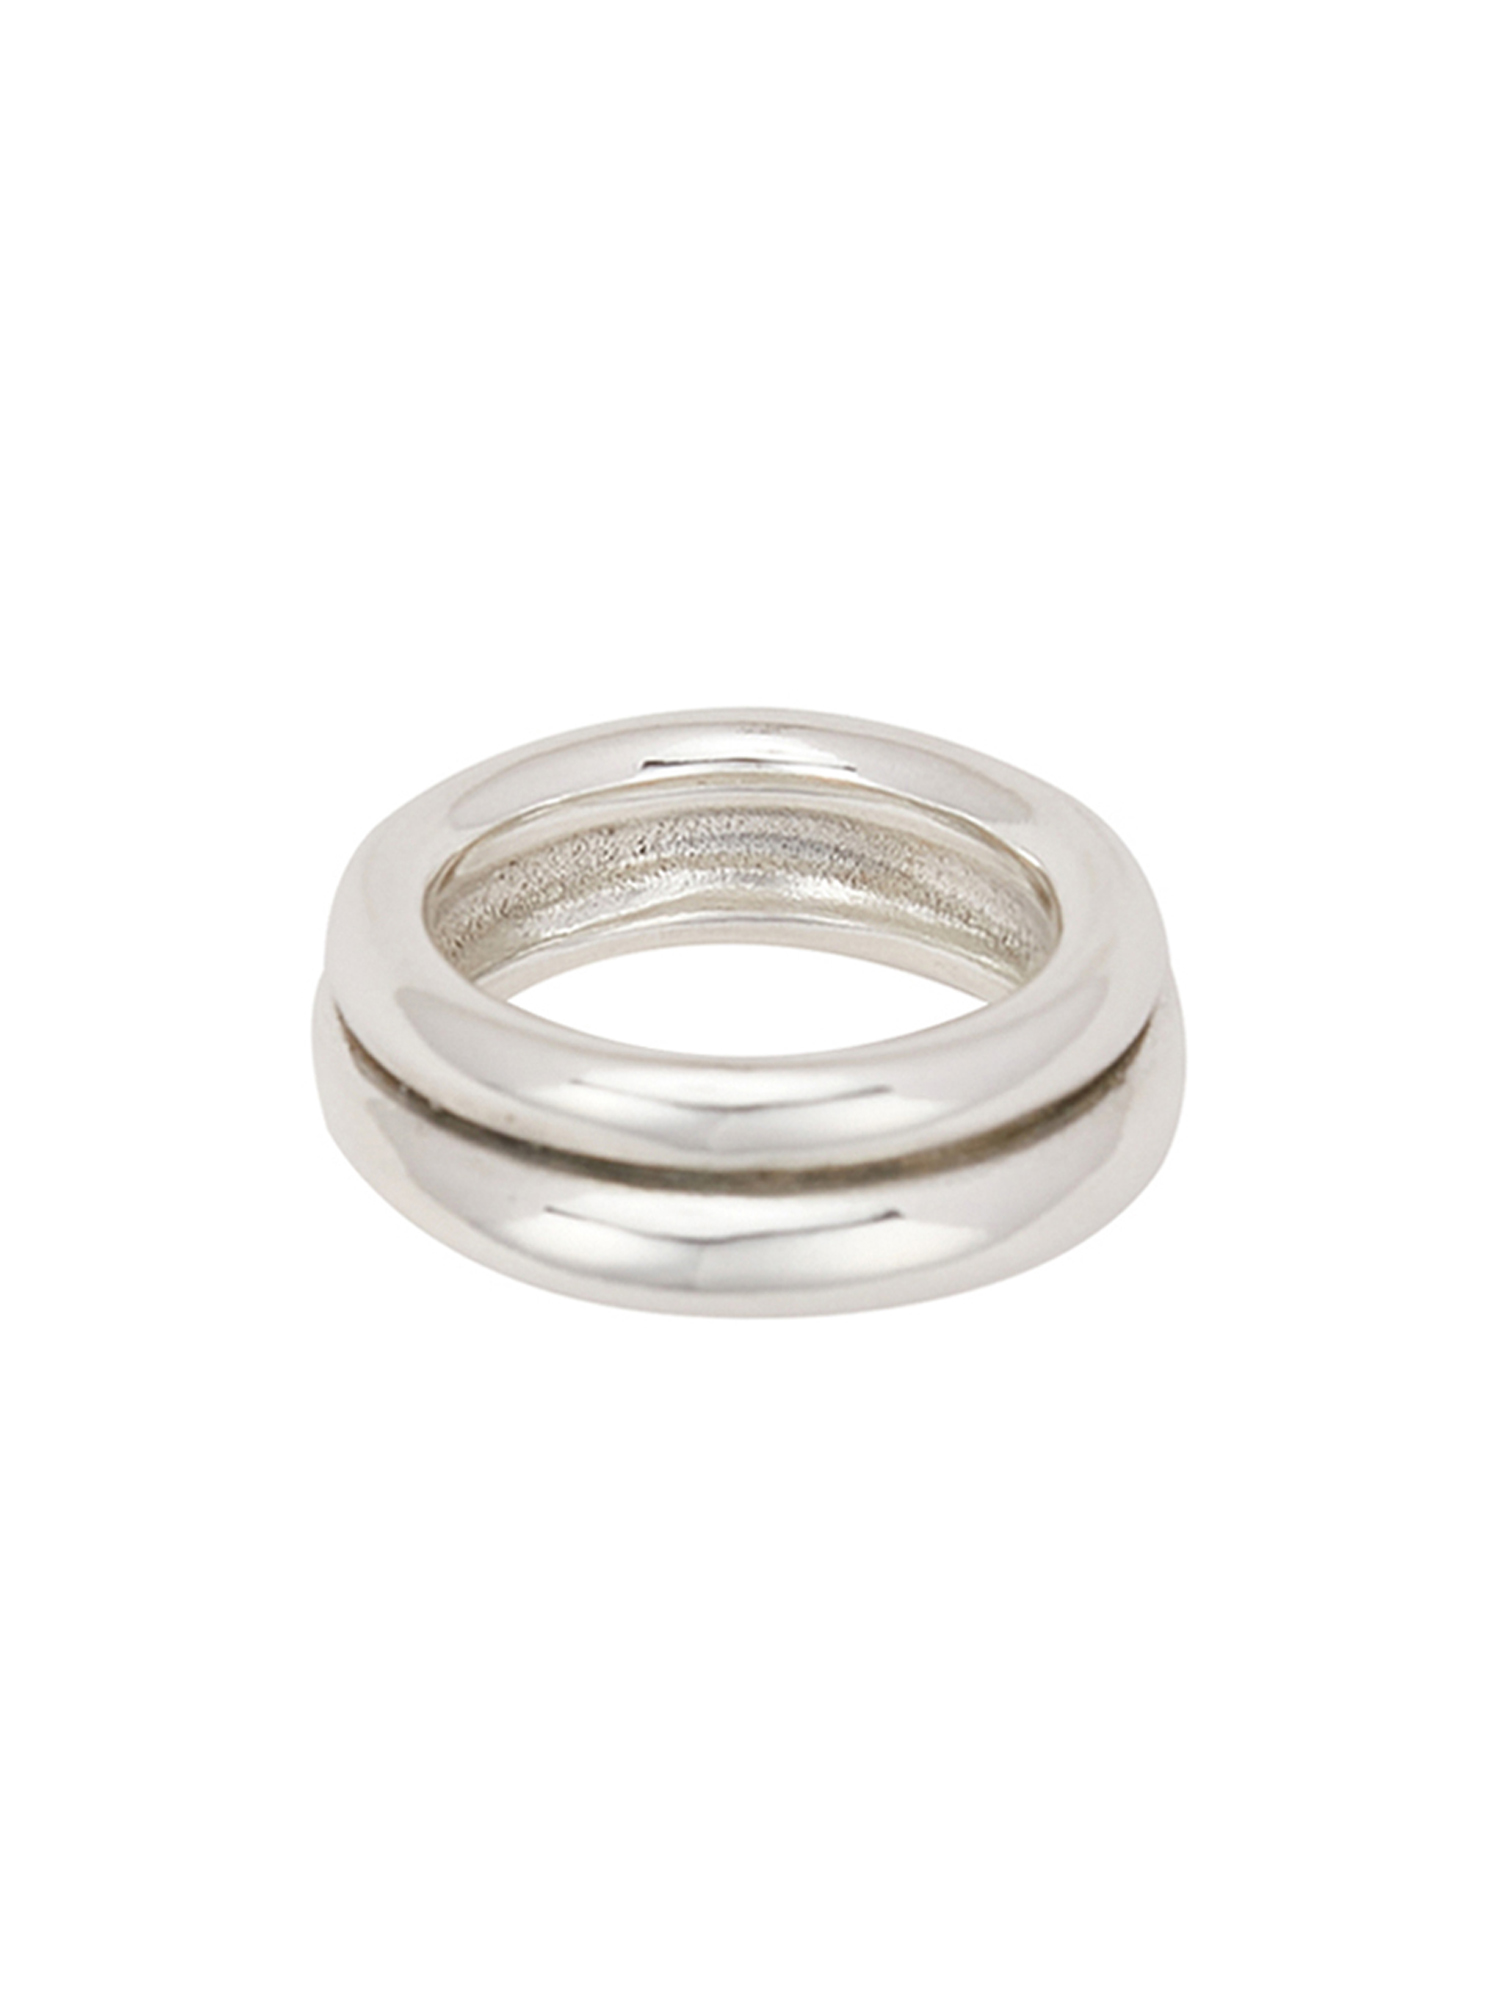 Double Donut Ring - Silver